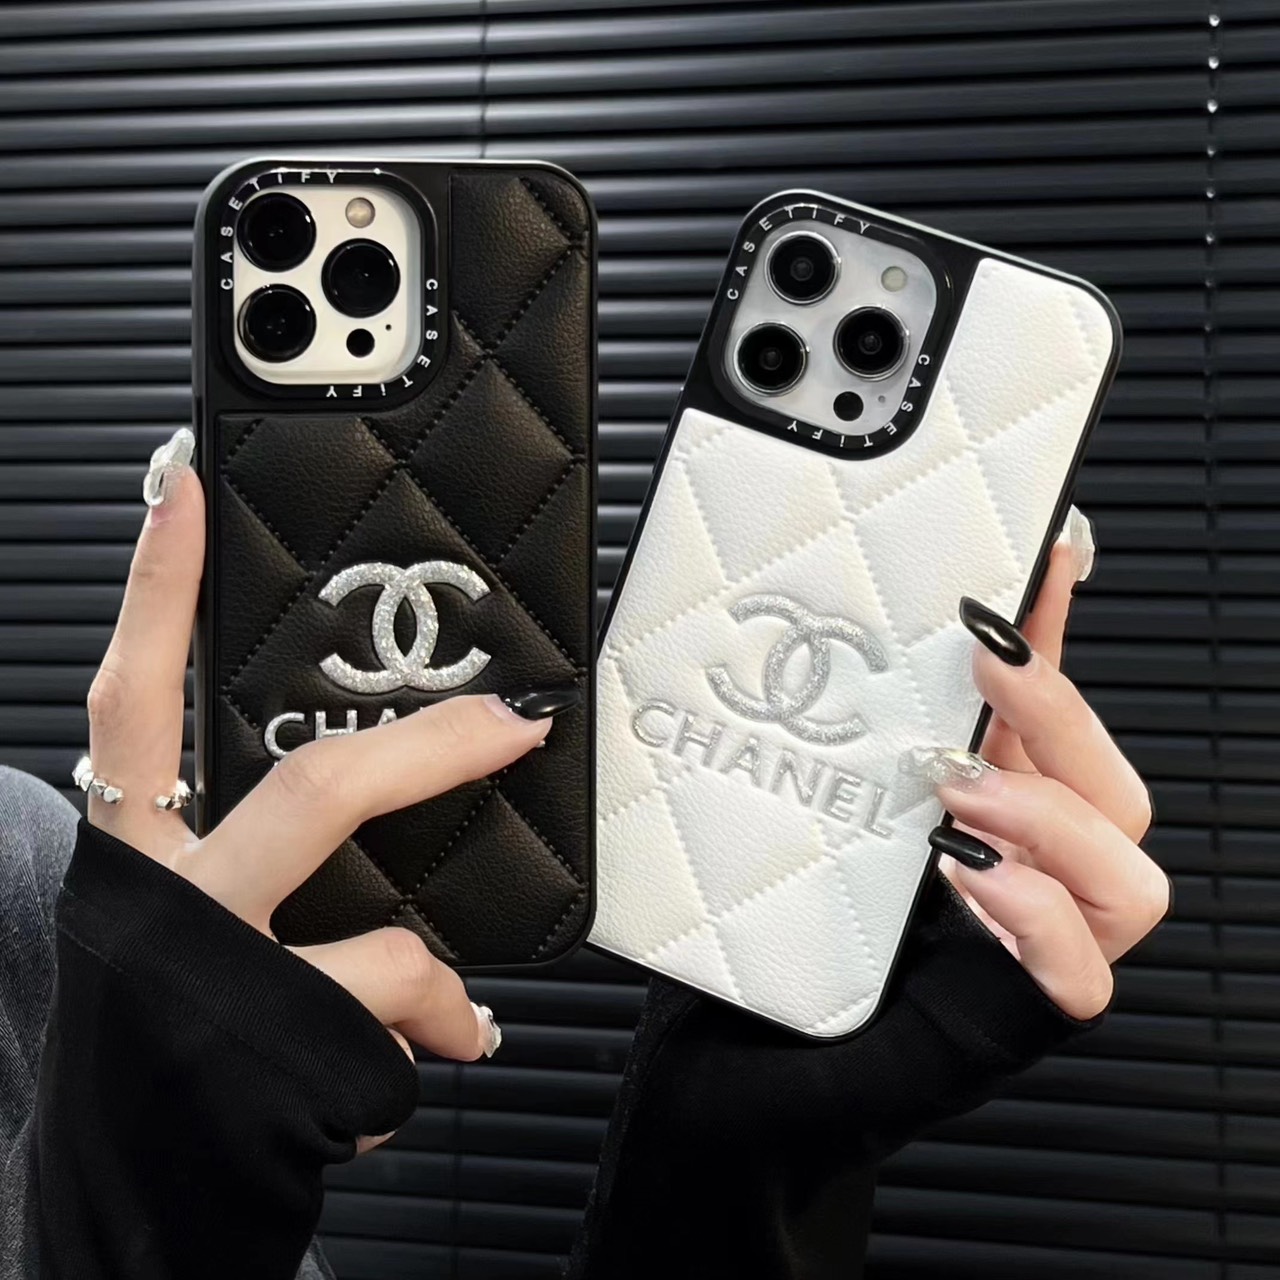 Wholesale Price Luxury Brand Mobile Phone Cases Design Female Chanel Case  for iPhone 12 PRO Max  China Leather Case and PU Case price   MadeinChinacom